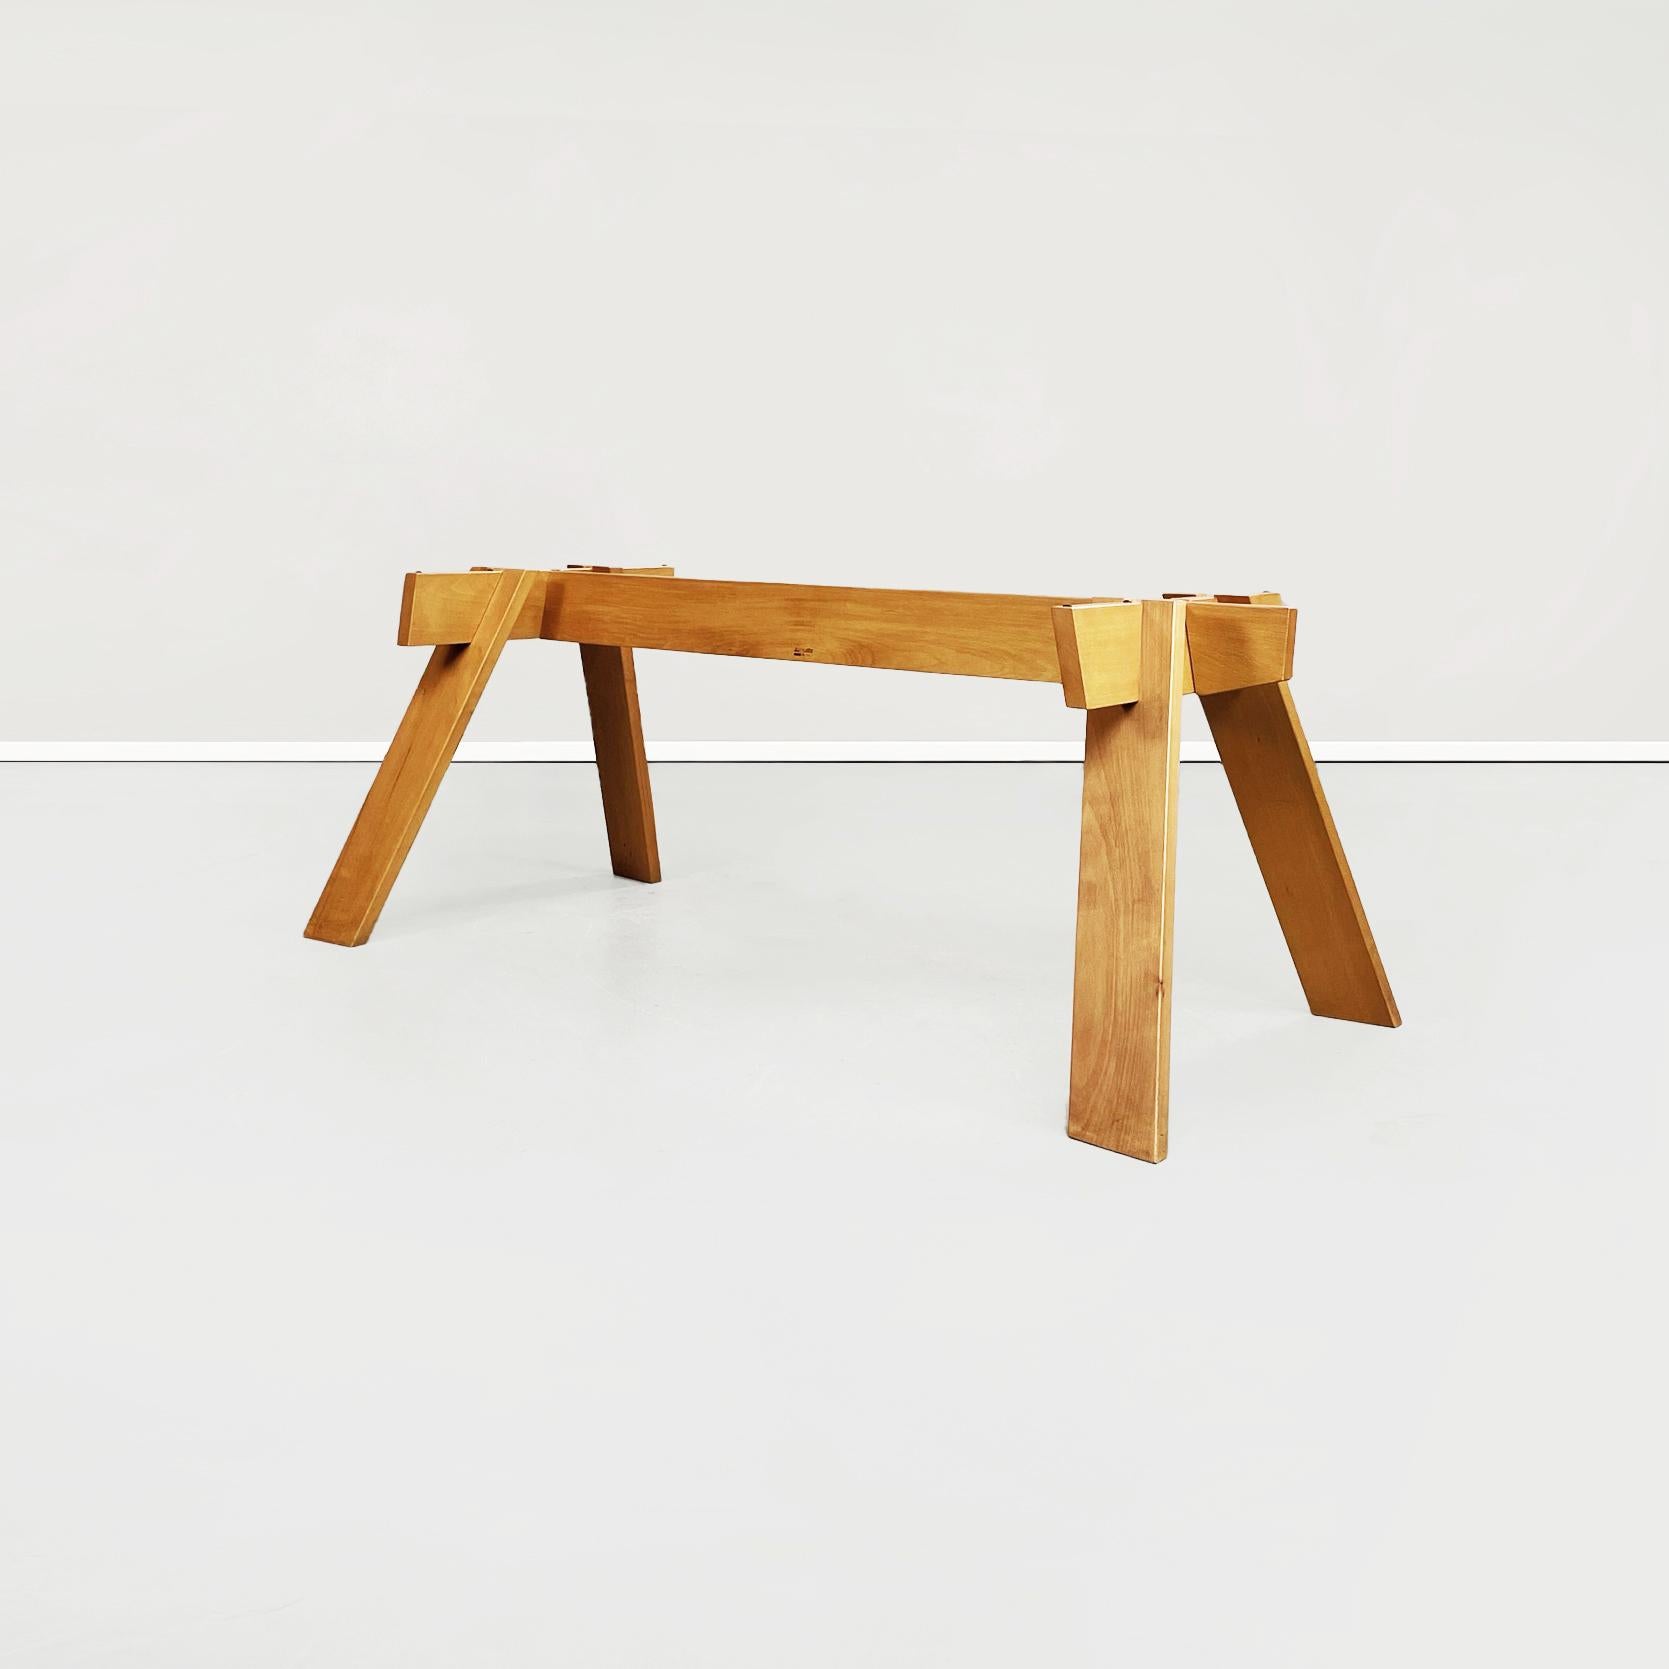 Late 20th Century Italian Mid-Century White Wooden Work Table by Minale Simpson for Zanotta, 1980s